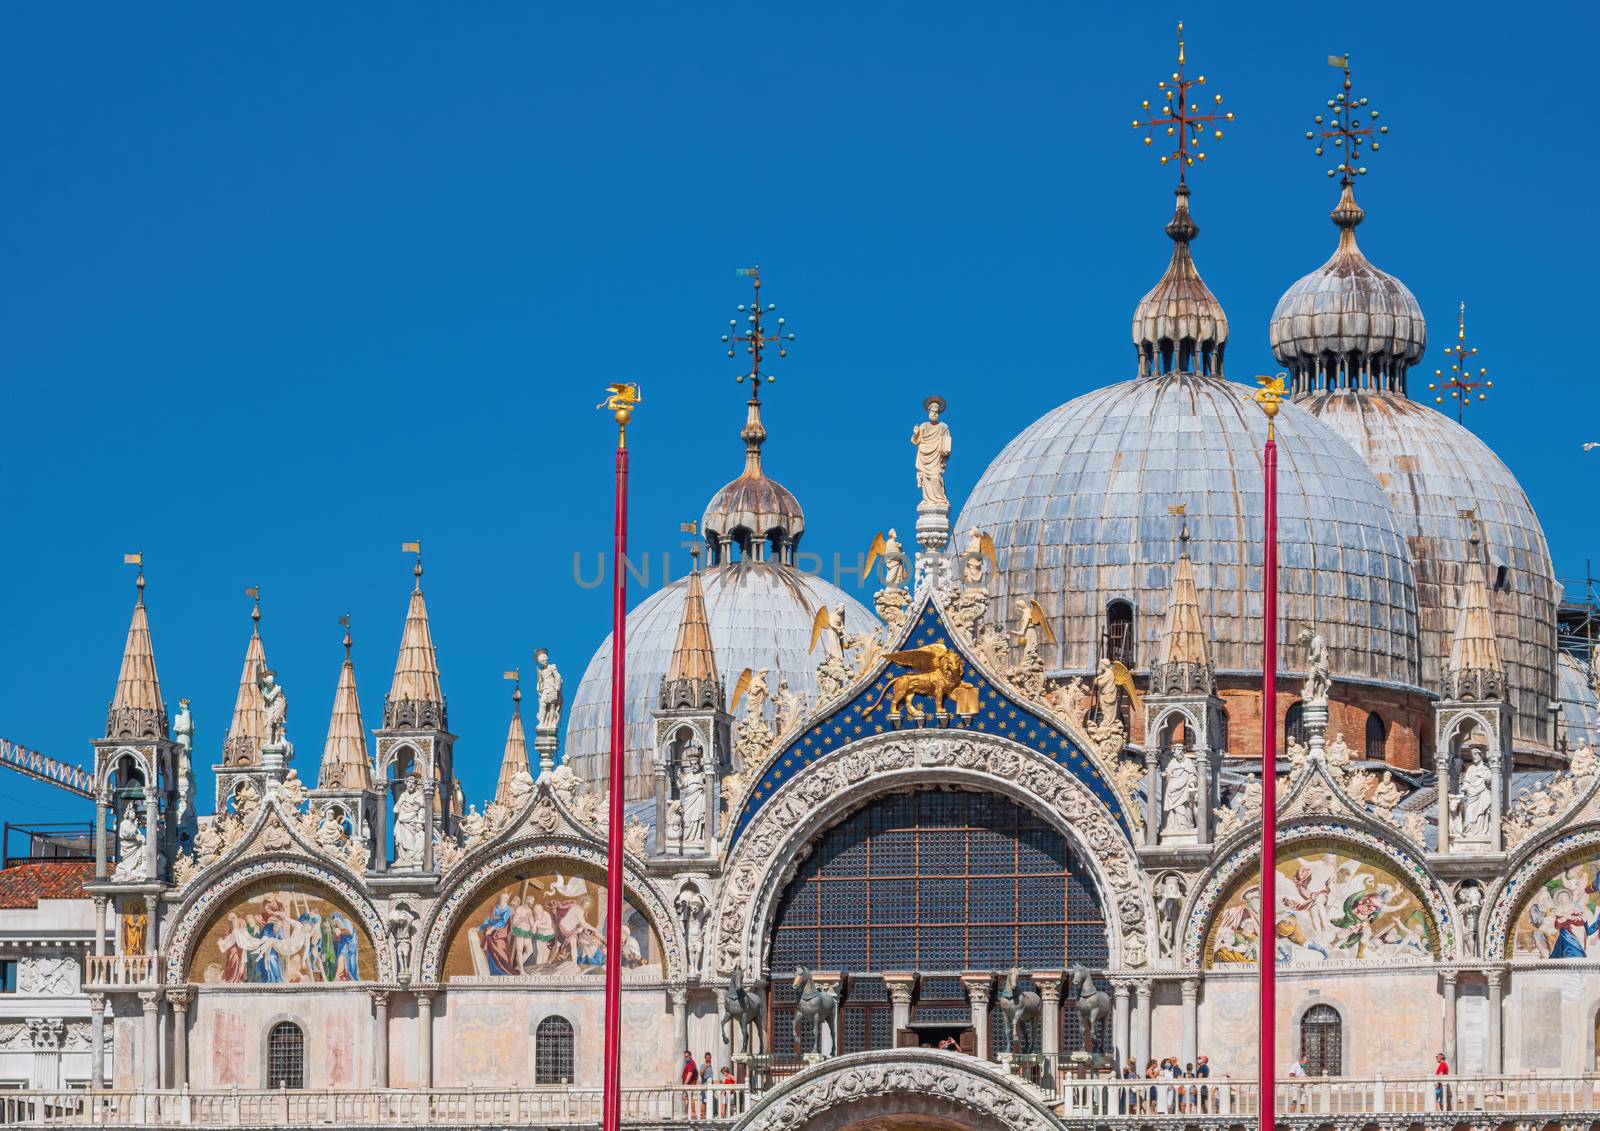 Angels and golden lion on the top of St Mark's Basilica (San Marco), Venice, Italy by COffe